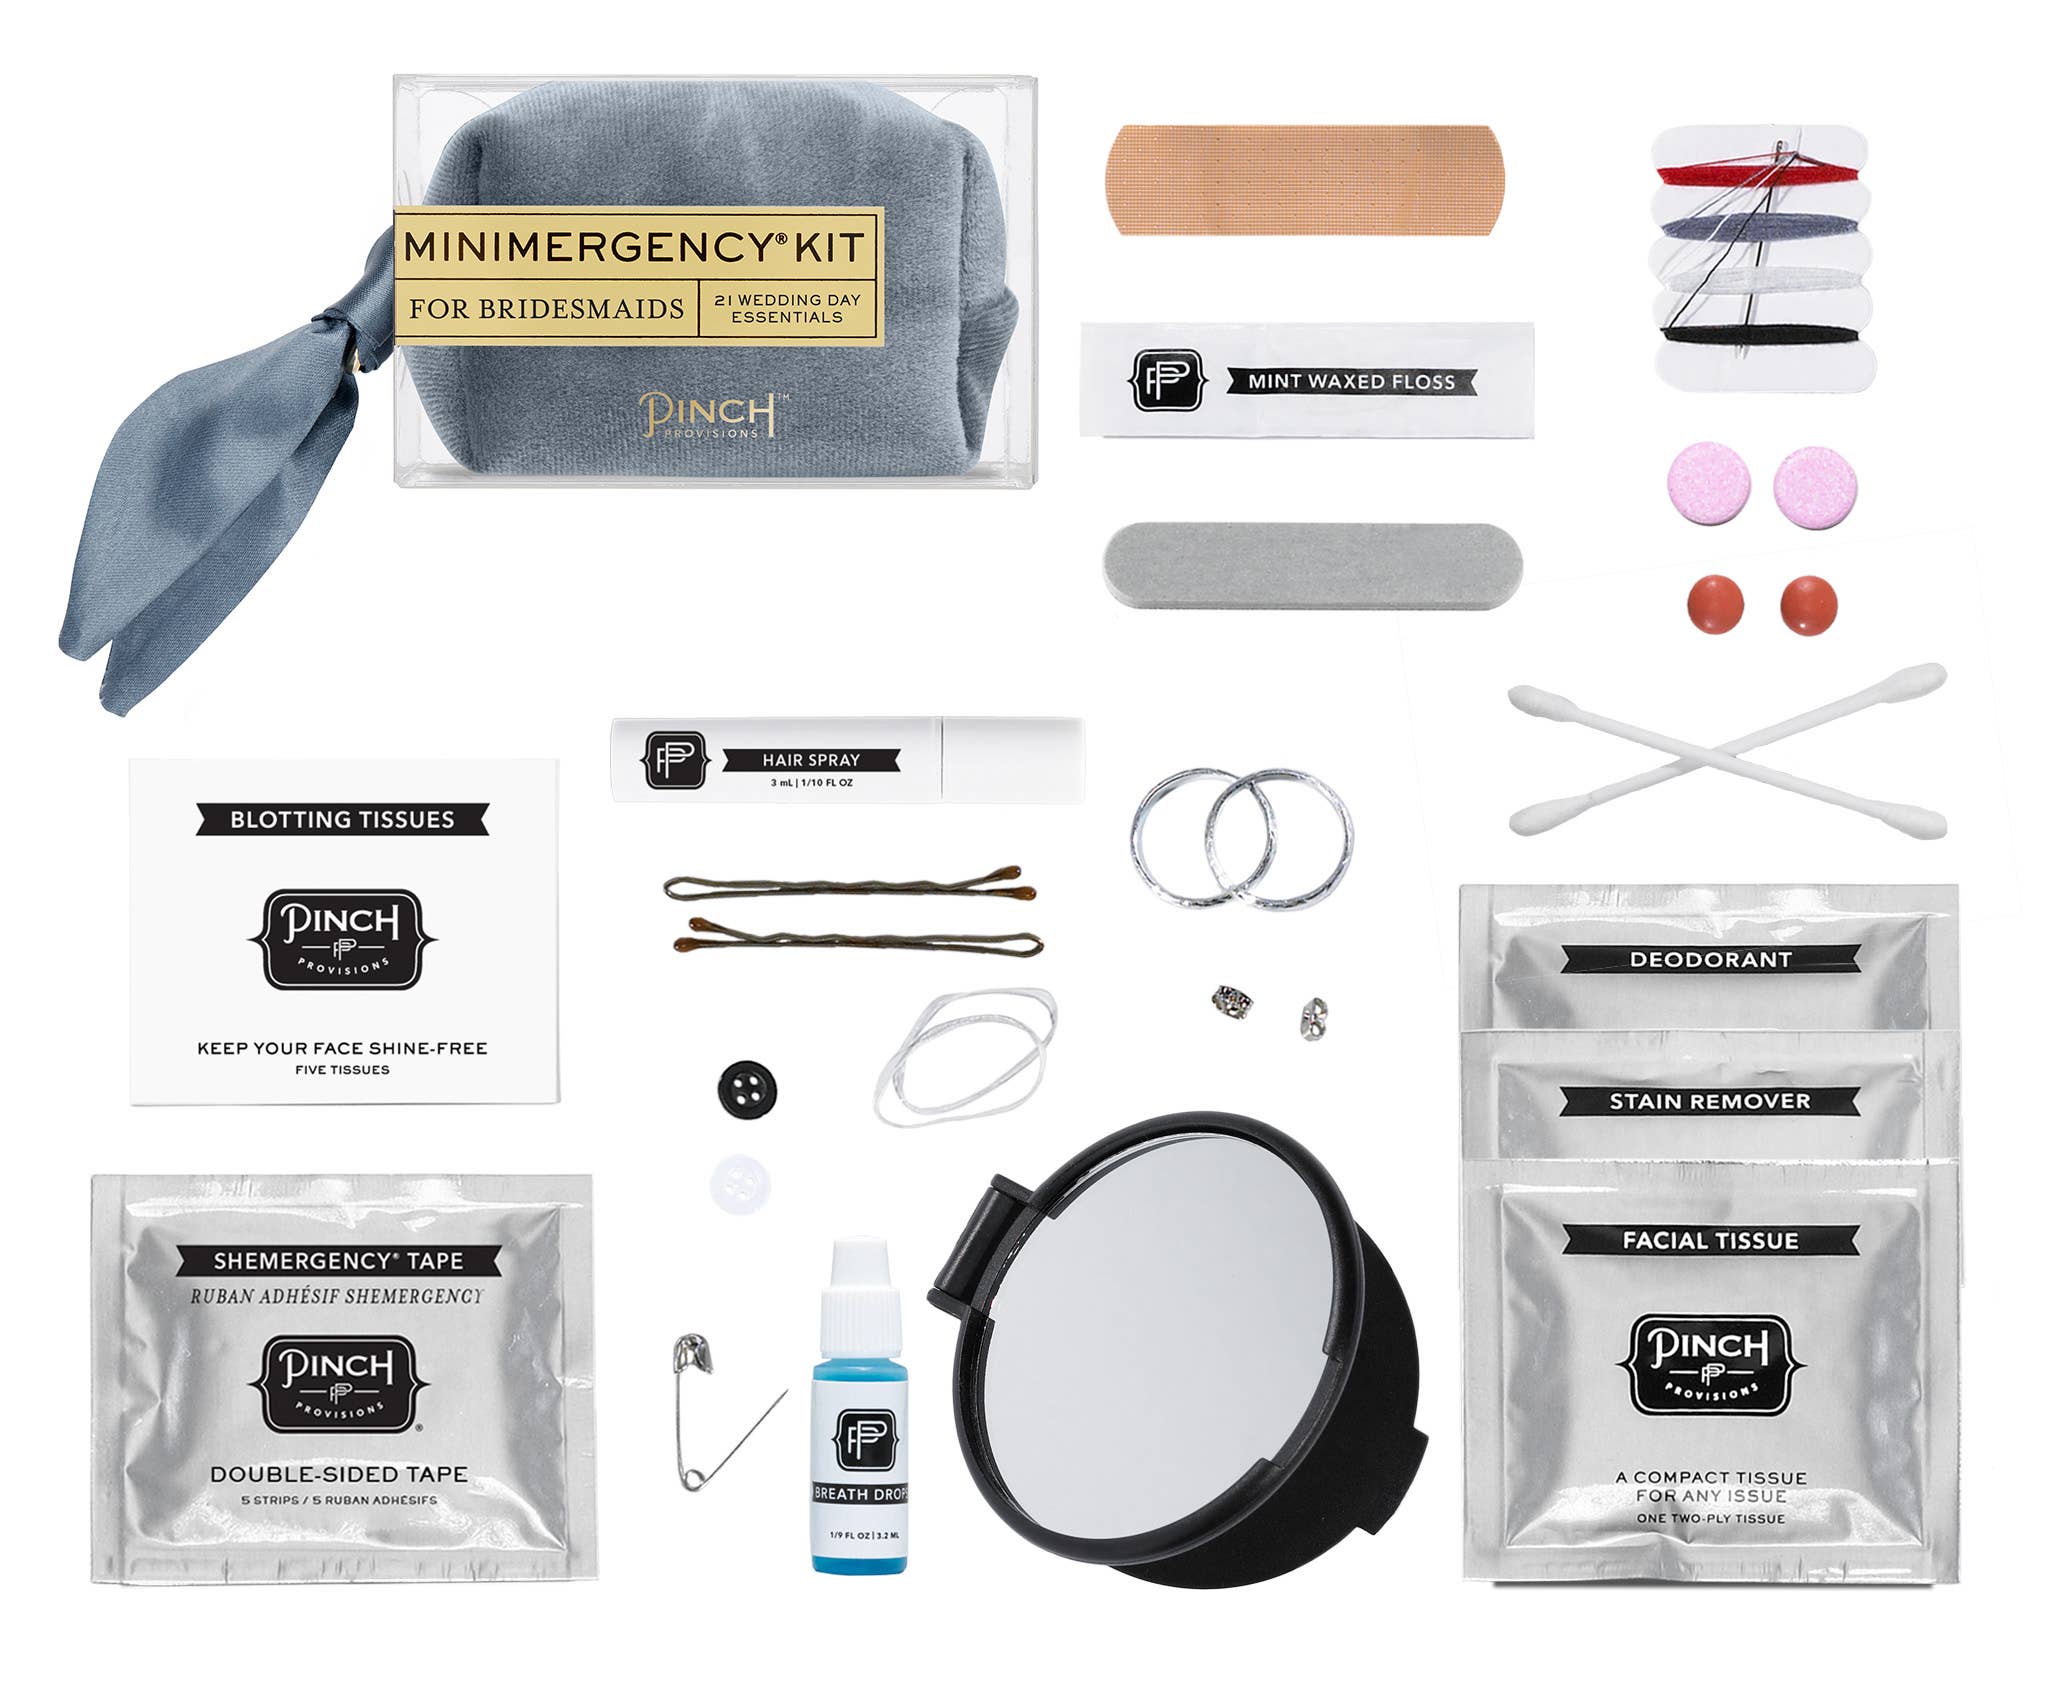 Velvet Minimergency Kits for Bridesmaids: Dusty Blue by Pinch Provisions